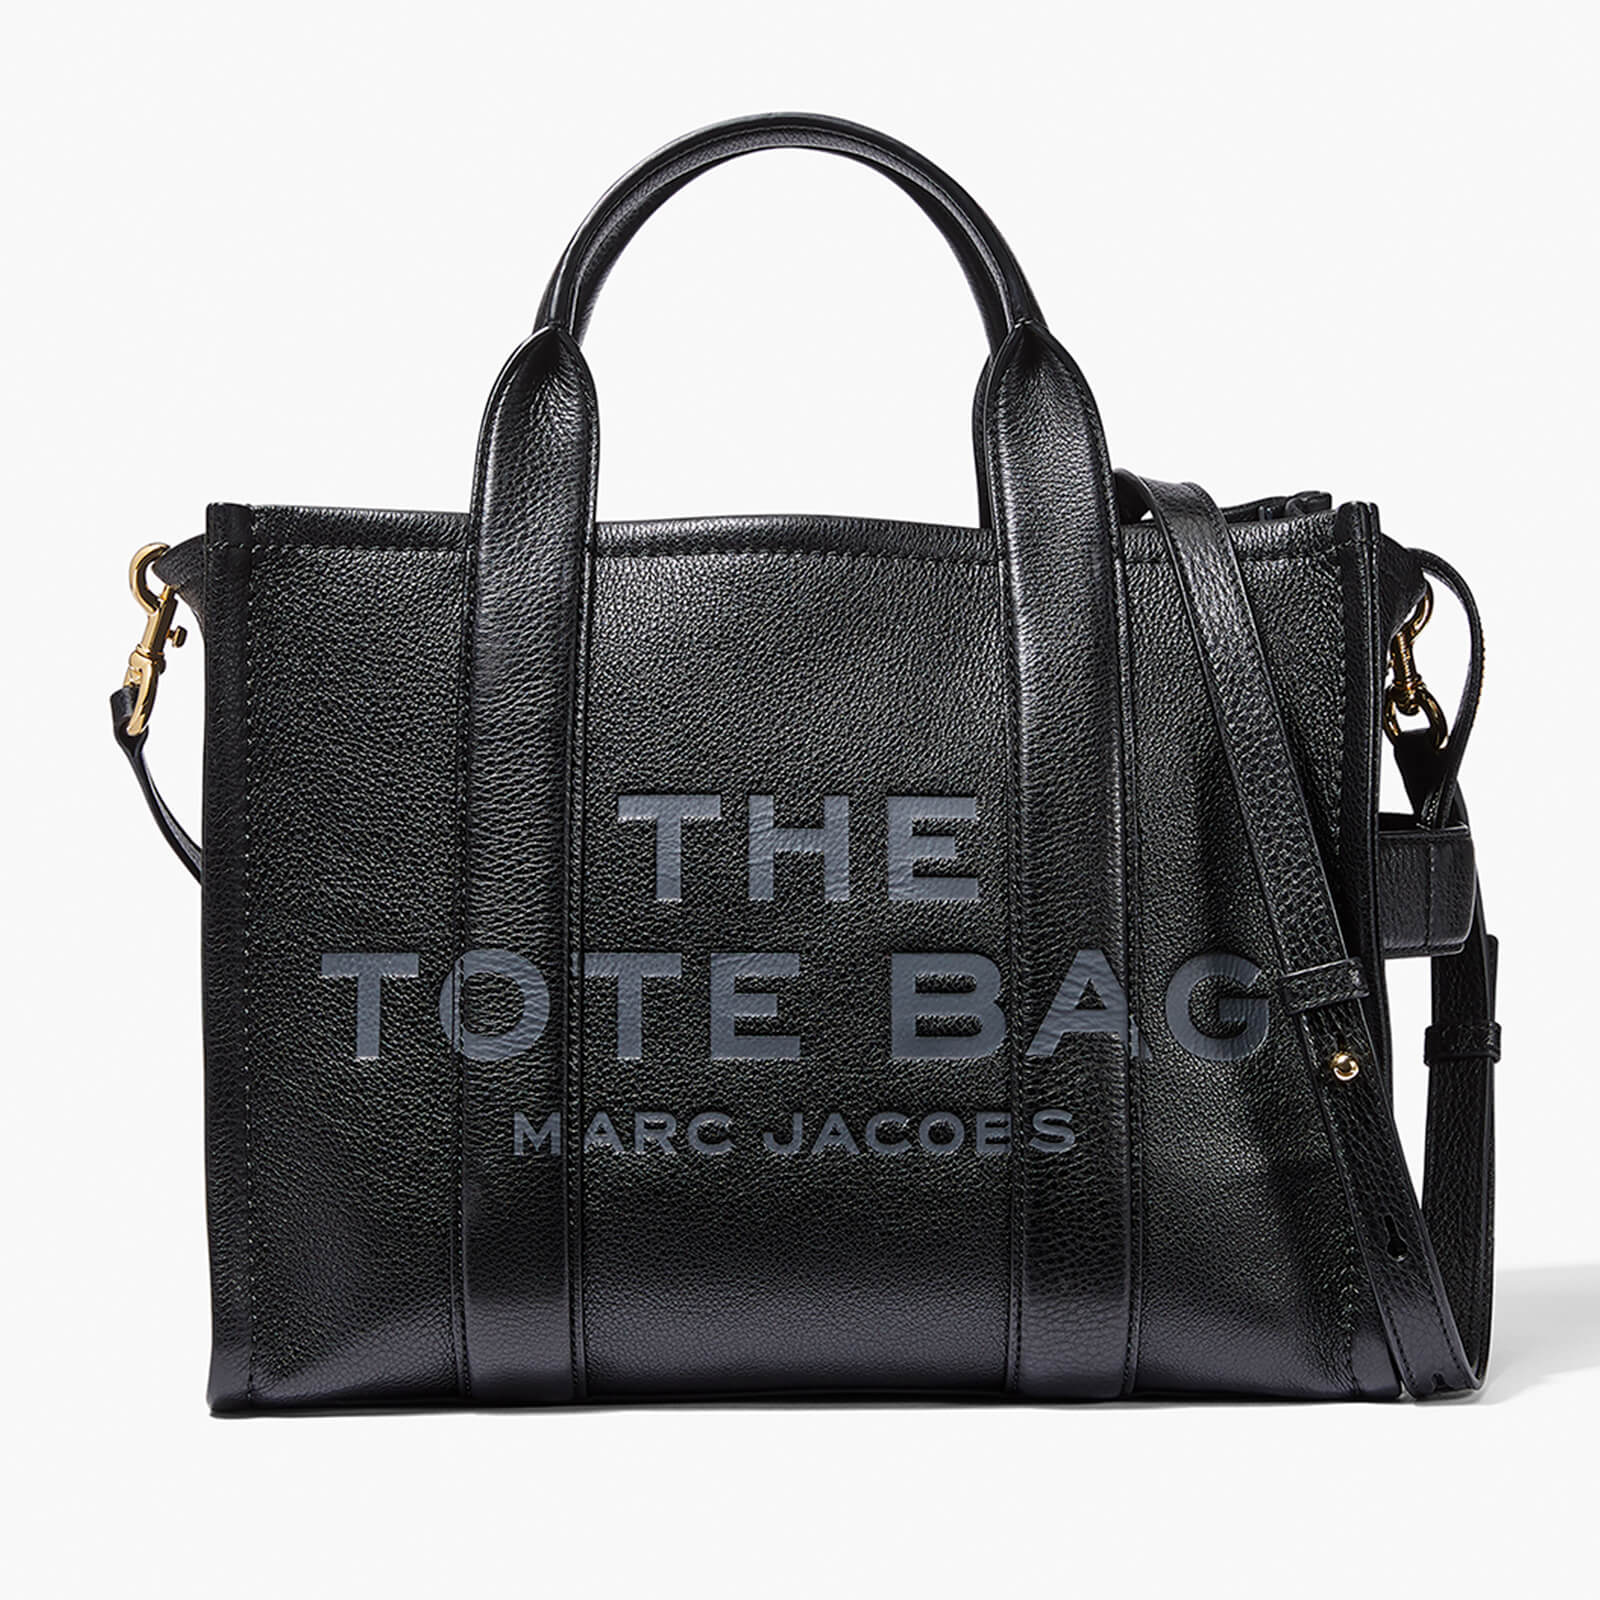 Photos - Other Bags & Accessories Marc Jacobs The Medium Leather Tote Bag 